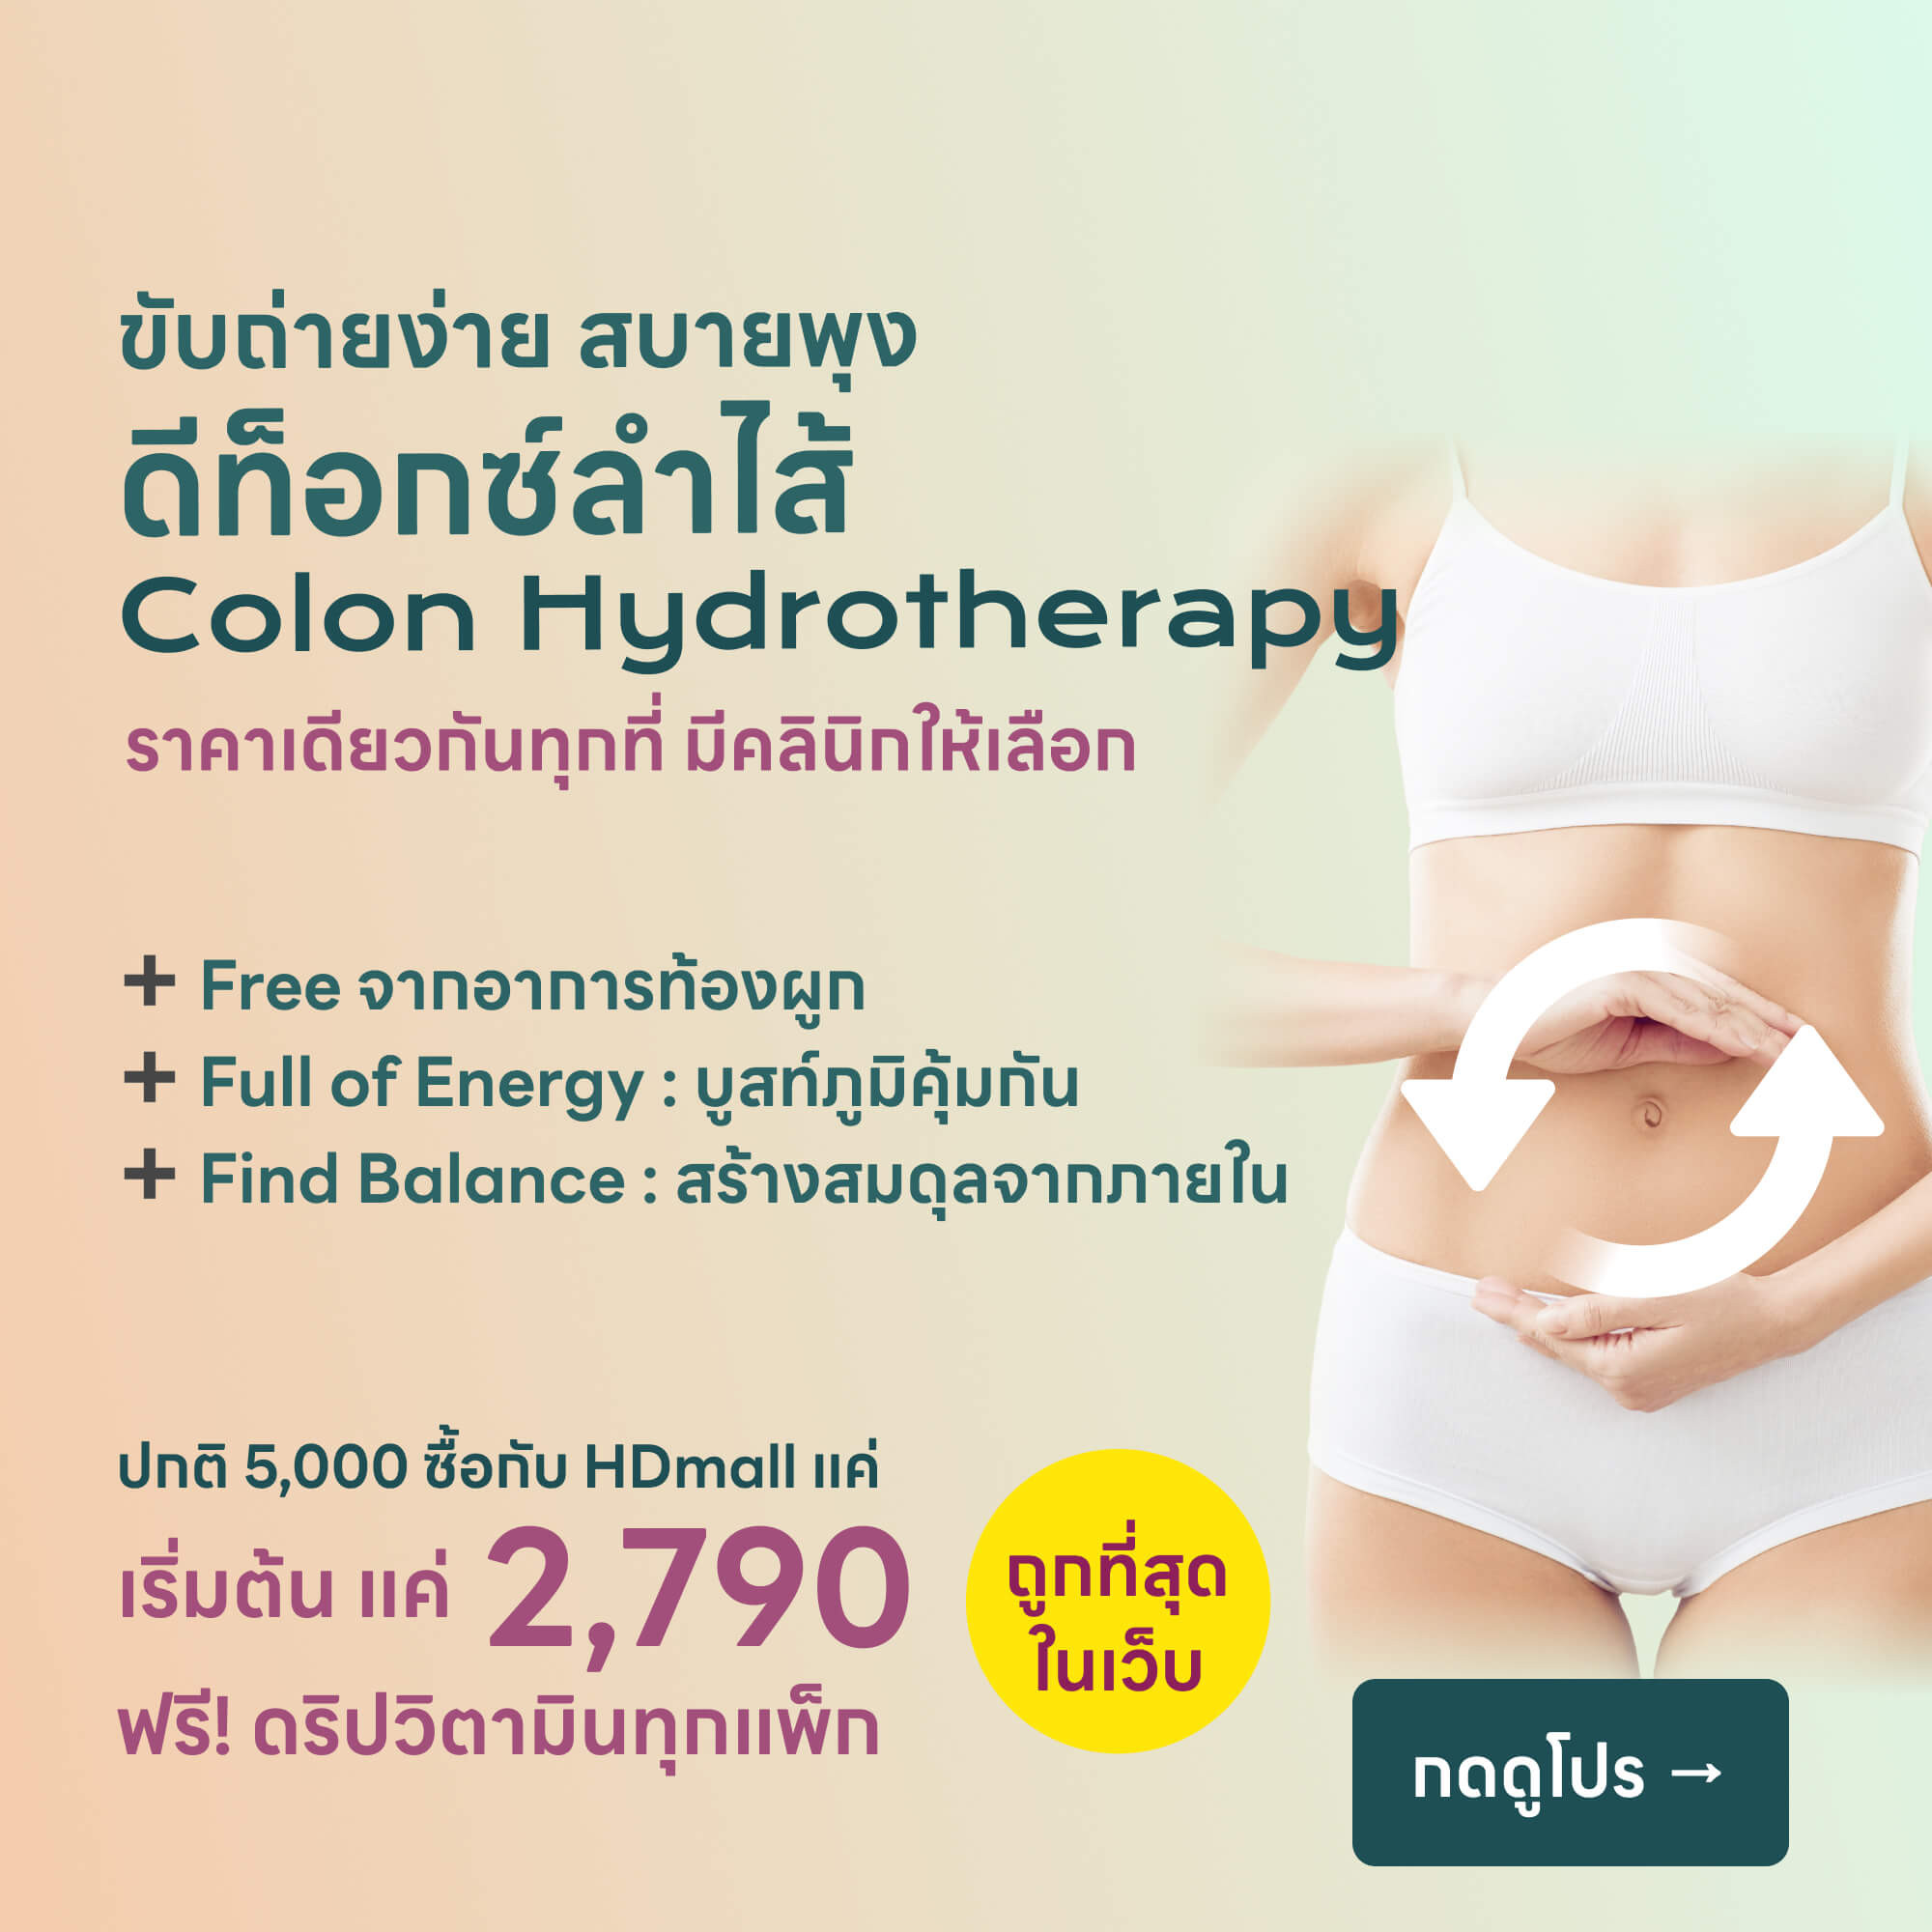 Colon Hydrotherapy - HDmall + 